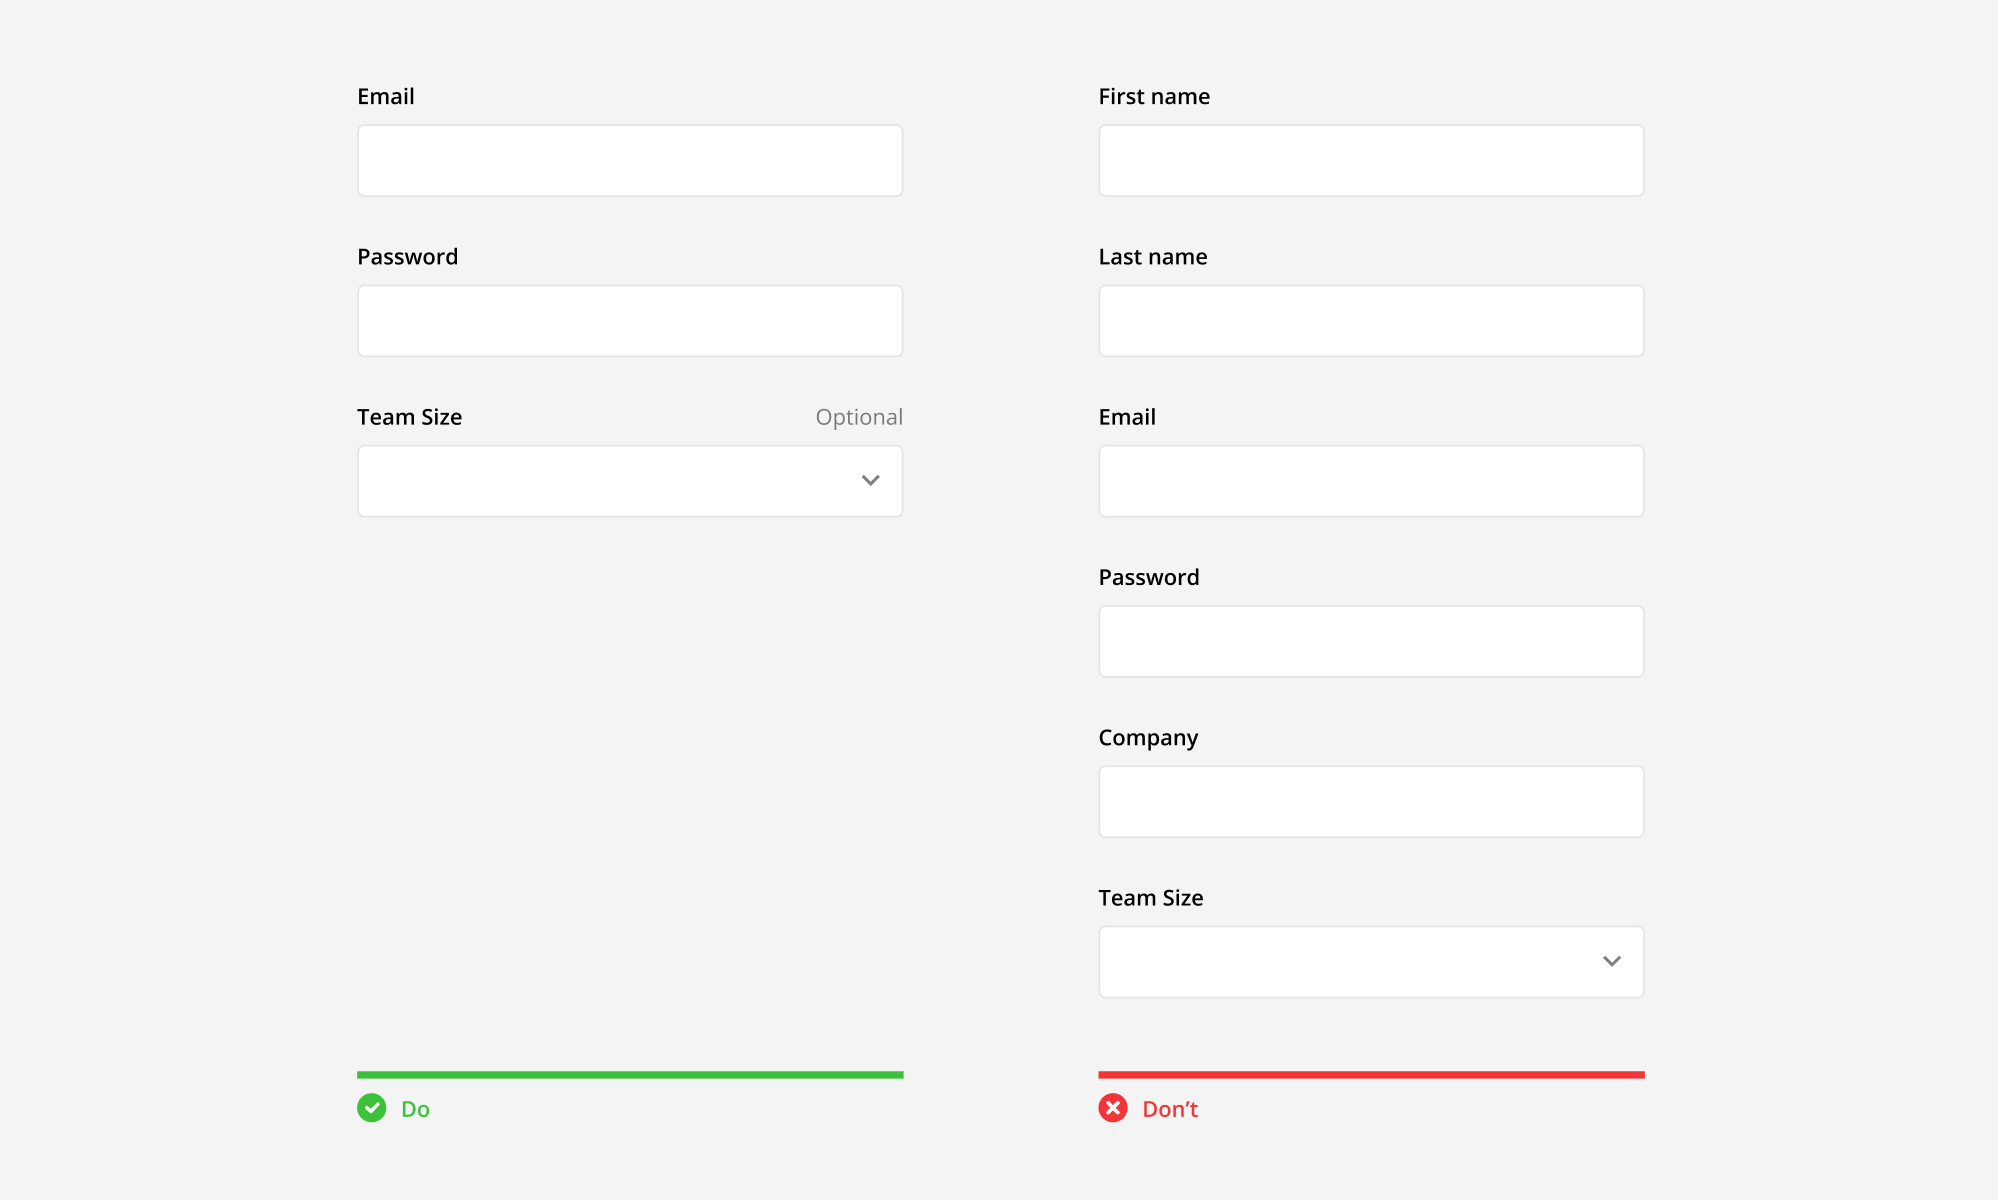 Ui Designers Guide To Creating Forms And Inputs By Molly Hellmuth